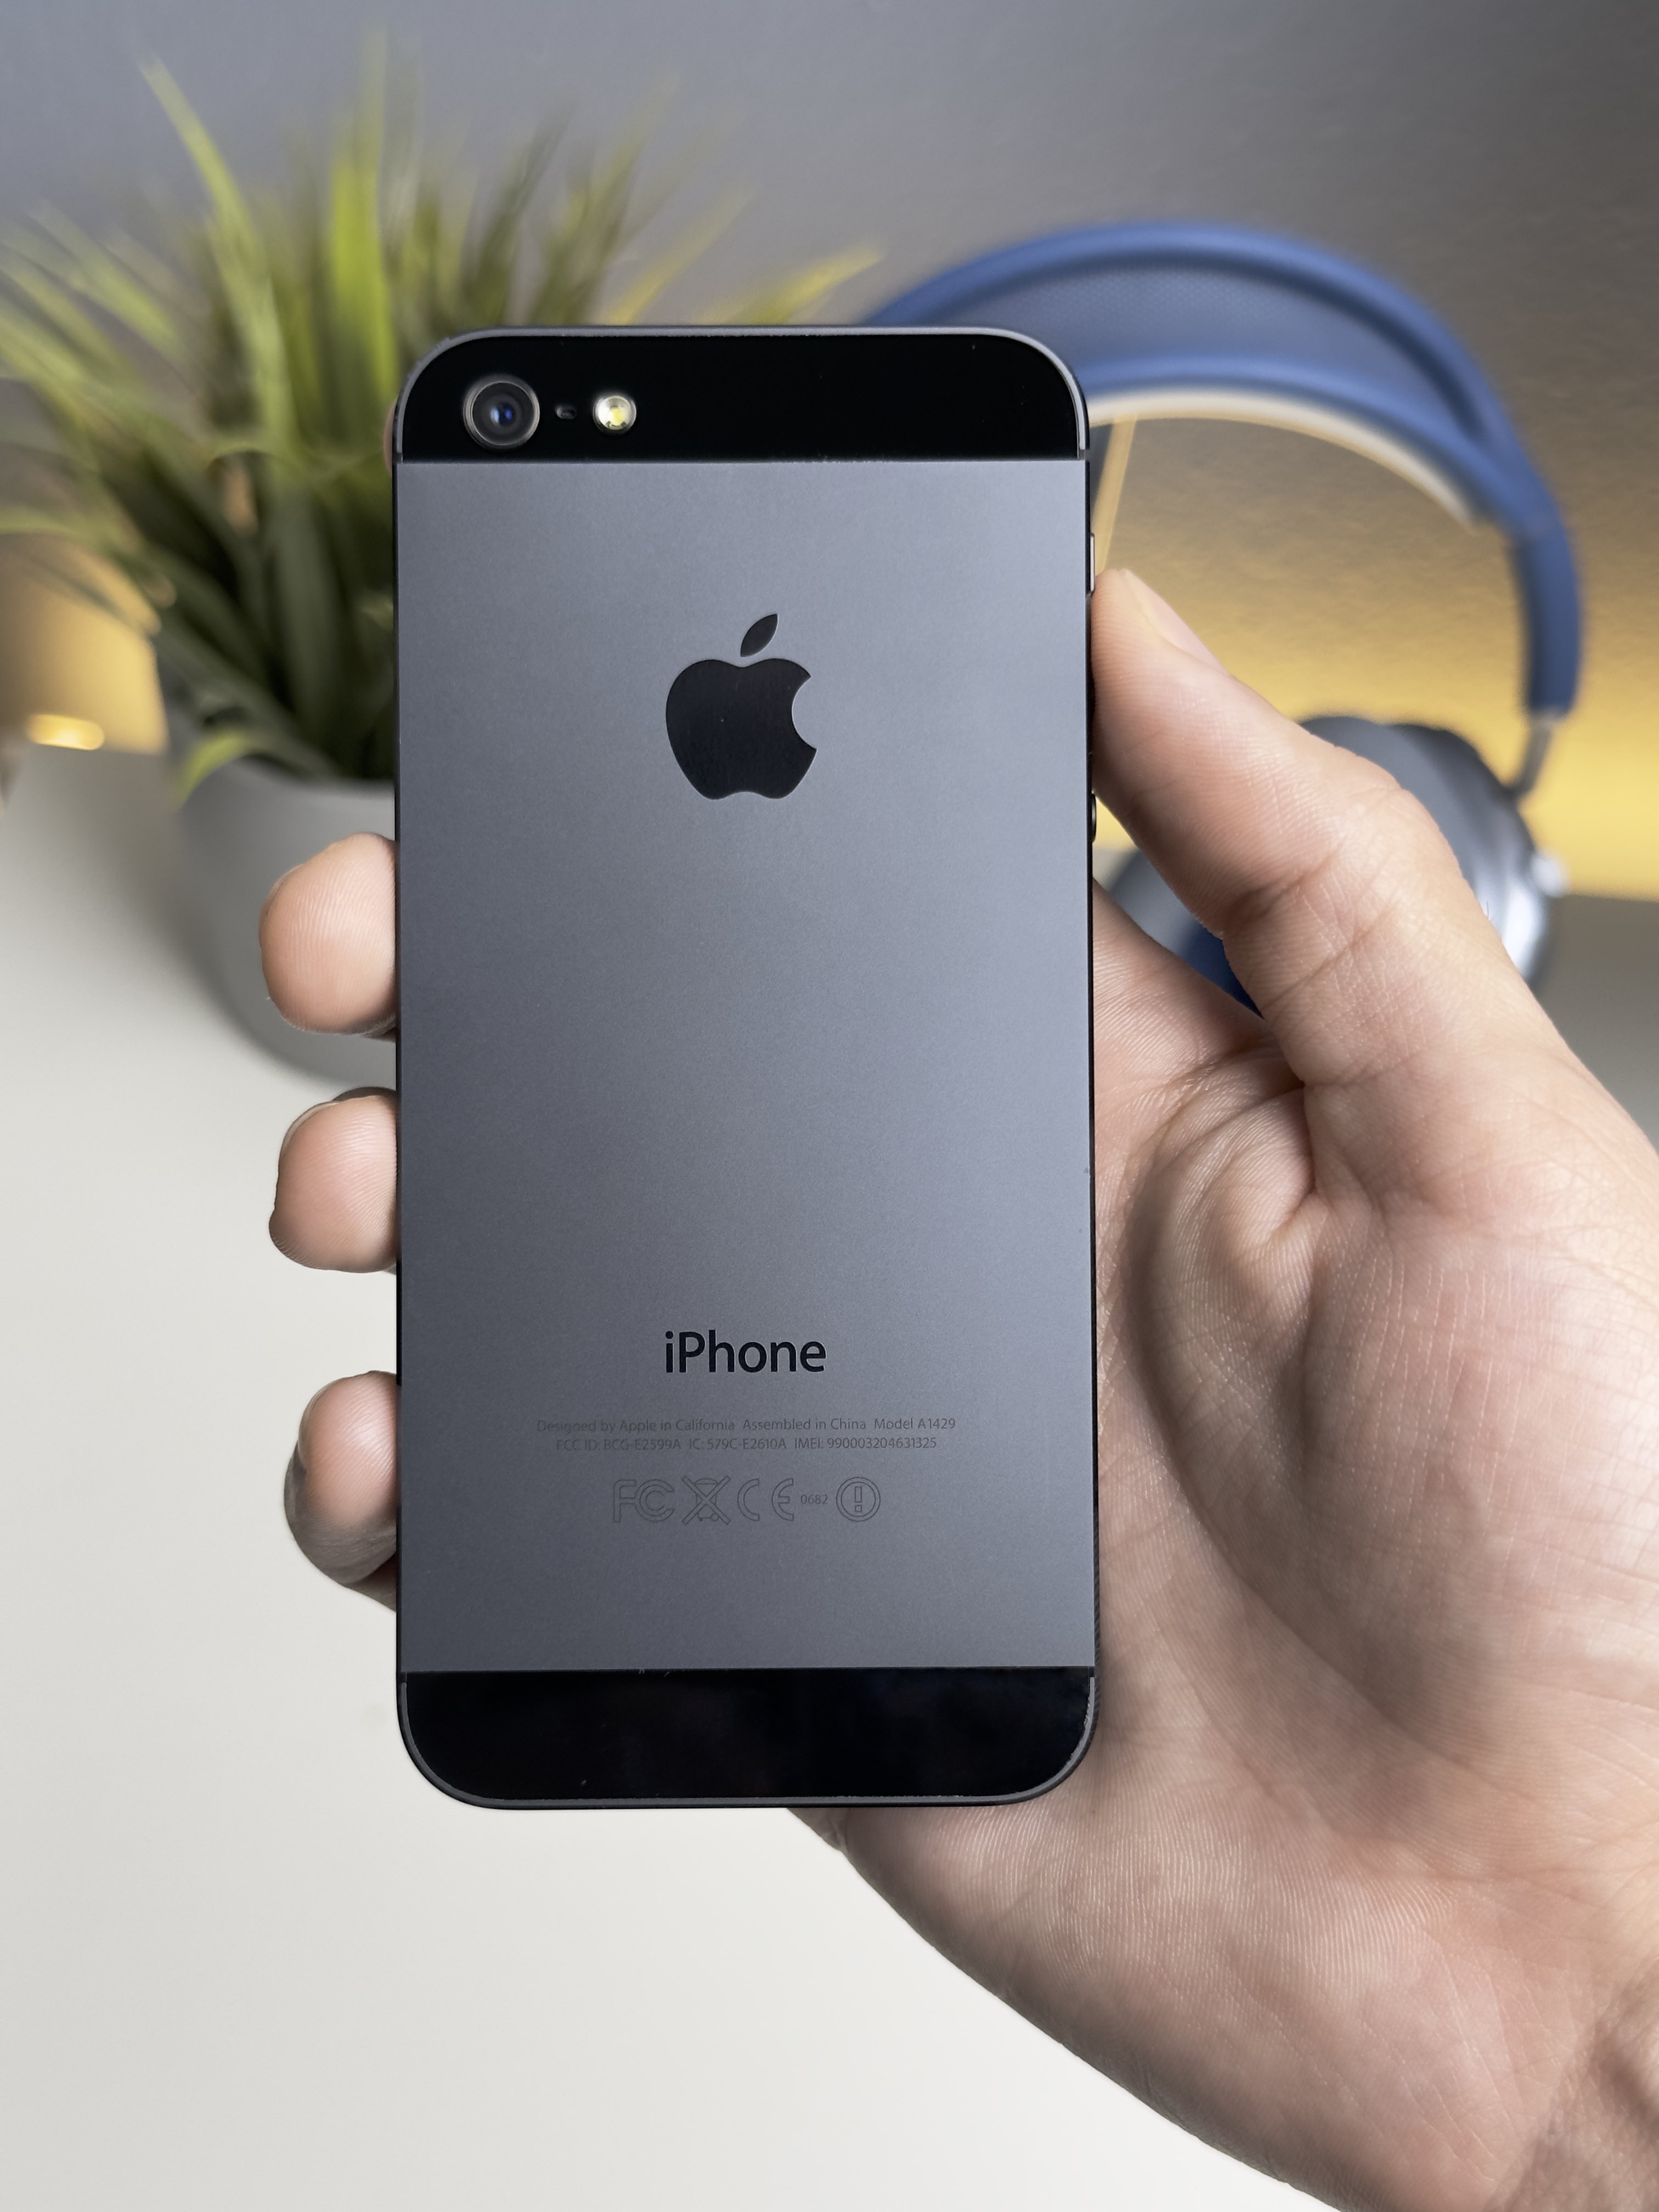 Apple Hub on X: The iPhone 5 was iconic One of the most beautiful